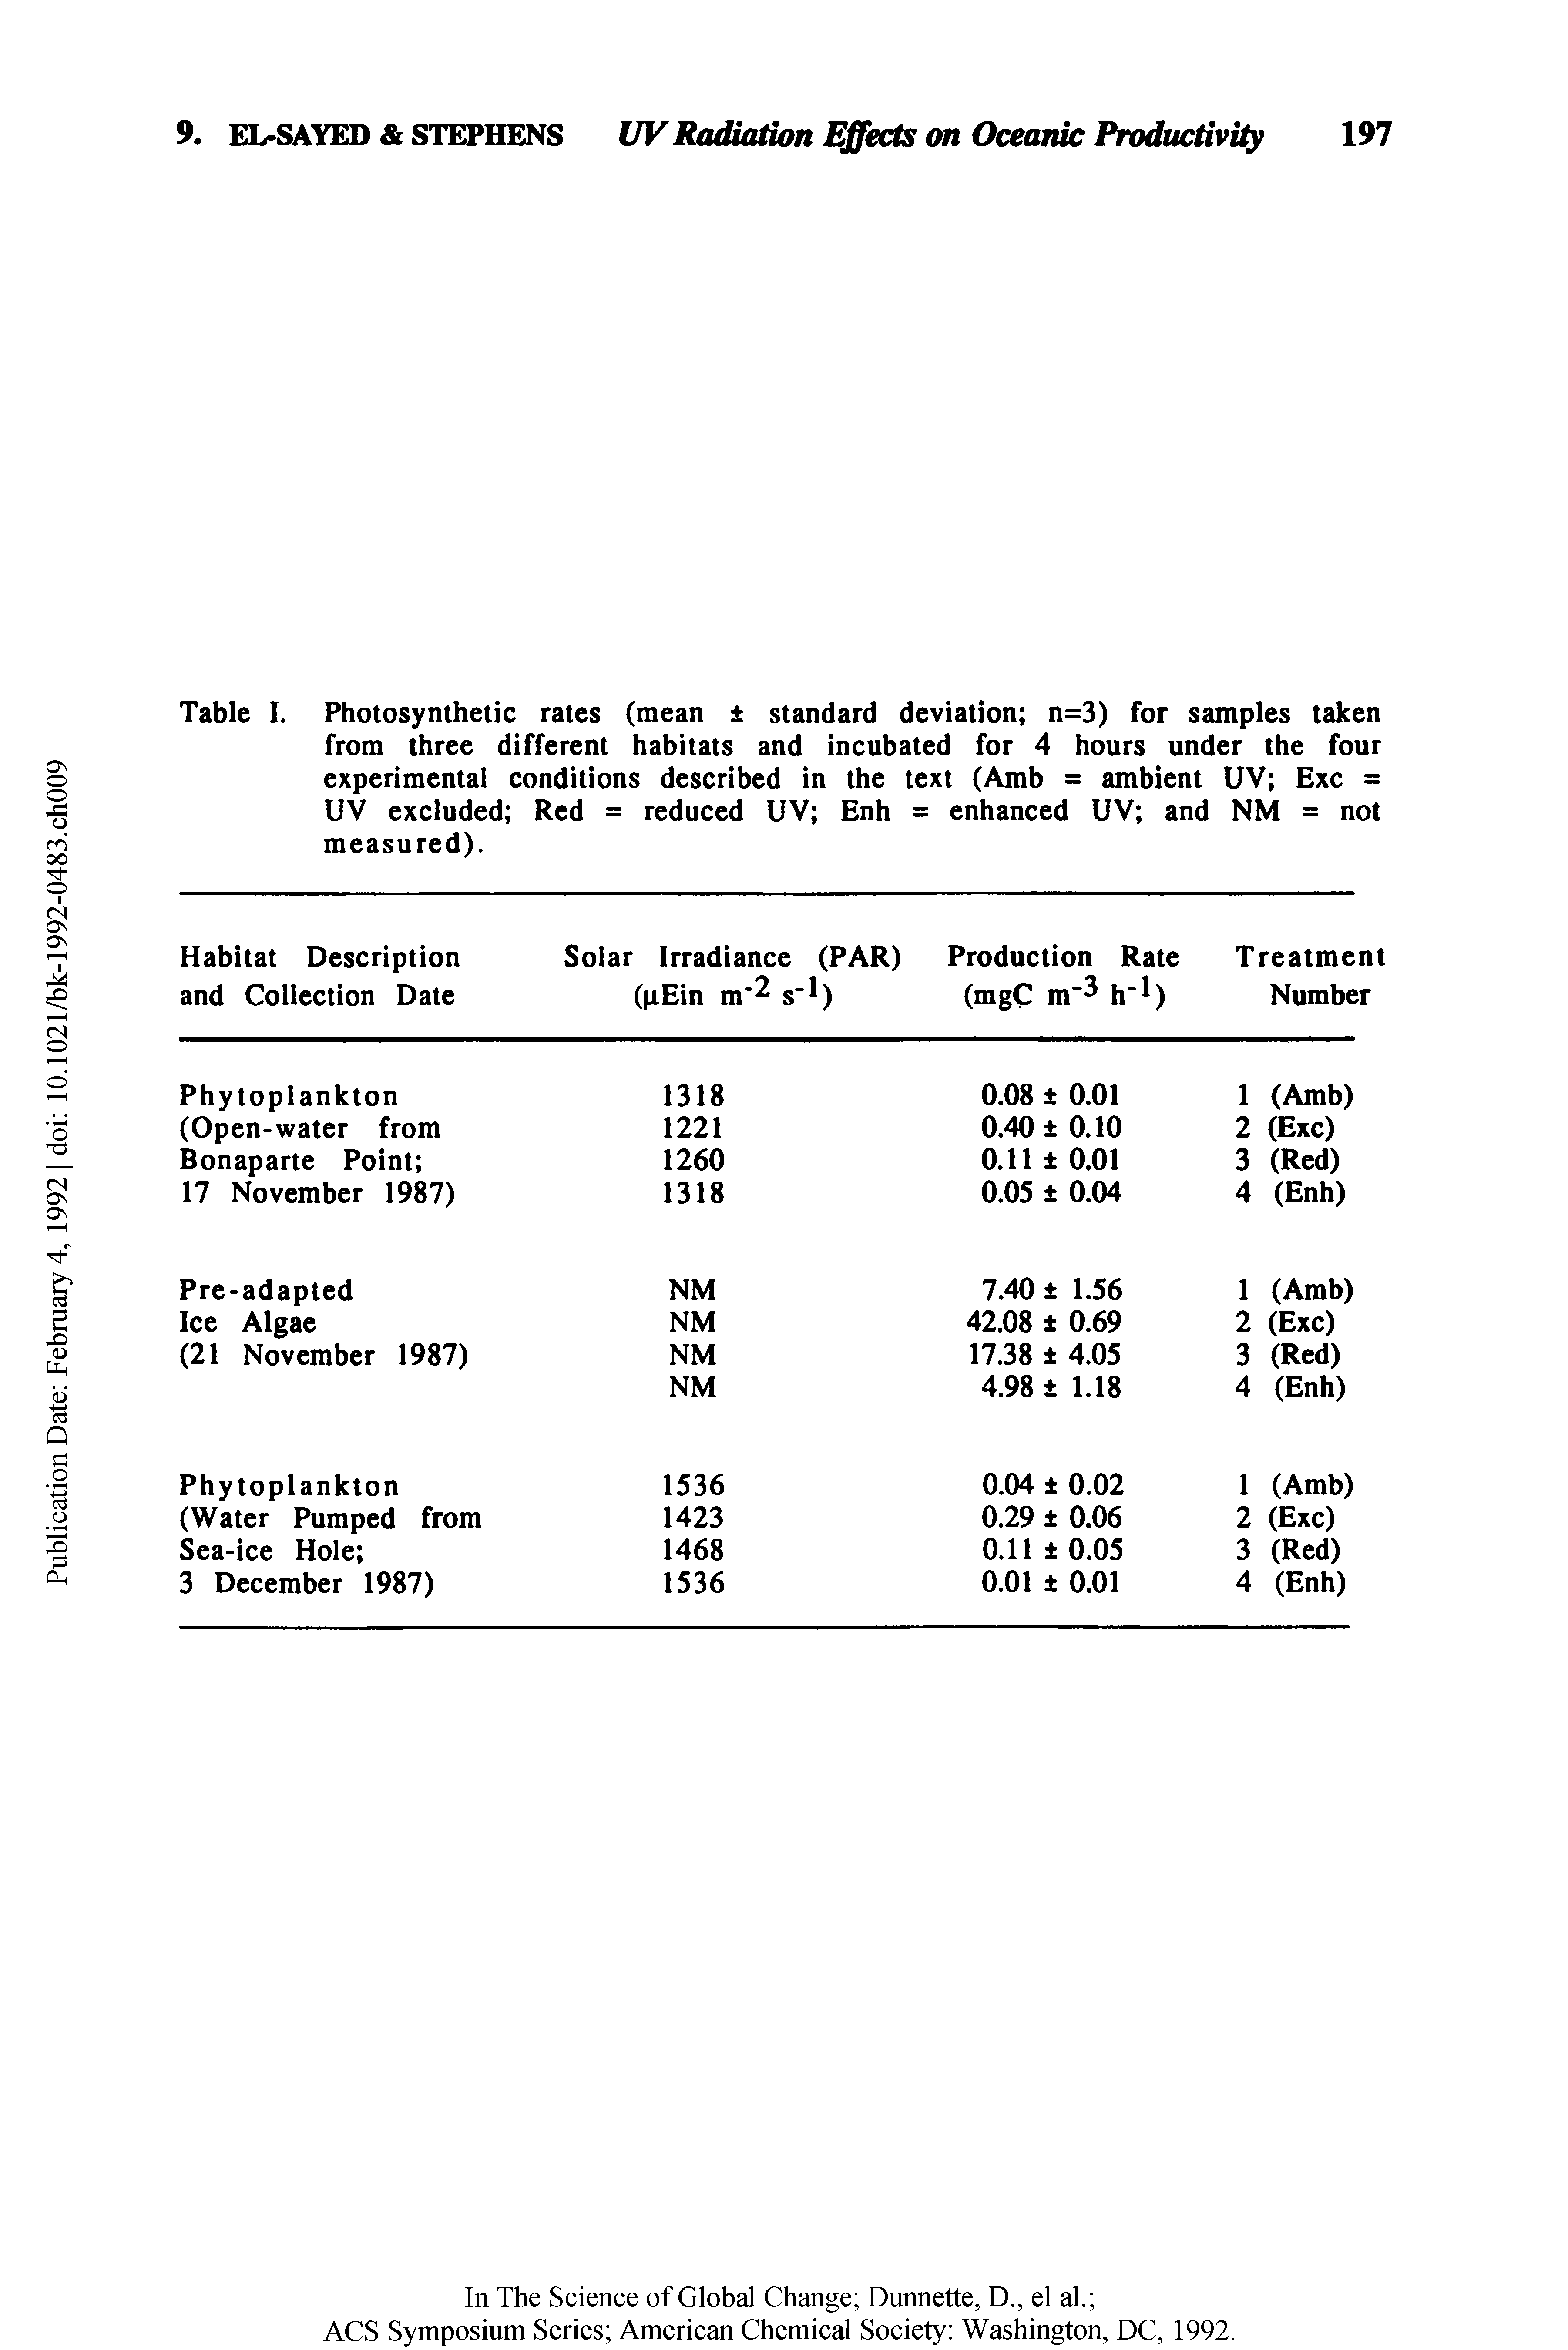 Table I. Photosynthetic rates (mean standard deviation n=3) for samples taken from three different habitats and incubated for 4 hours under the four experimental conditions described in the text (Amb = ambient UV Exc =...